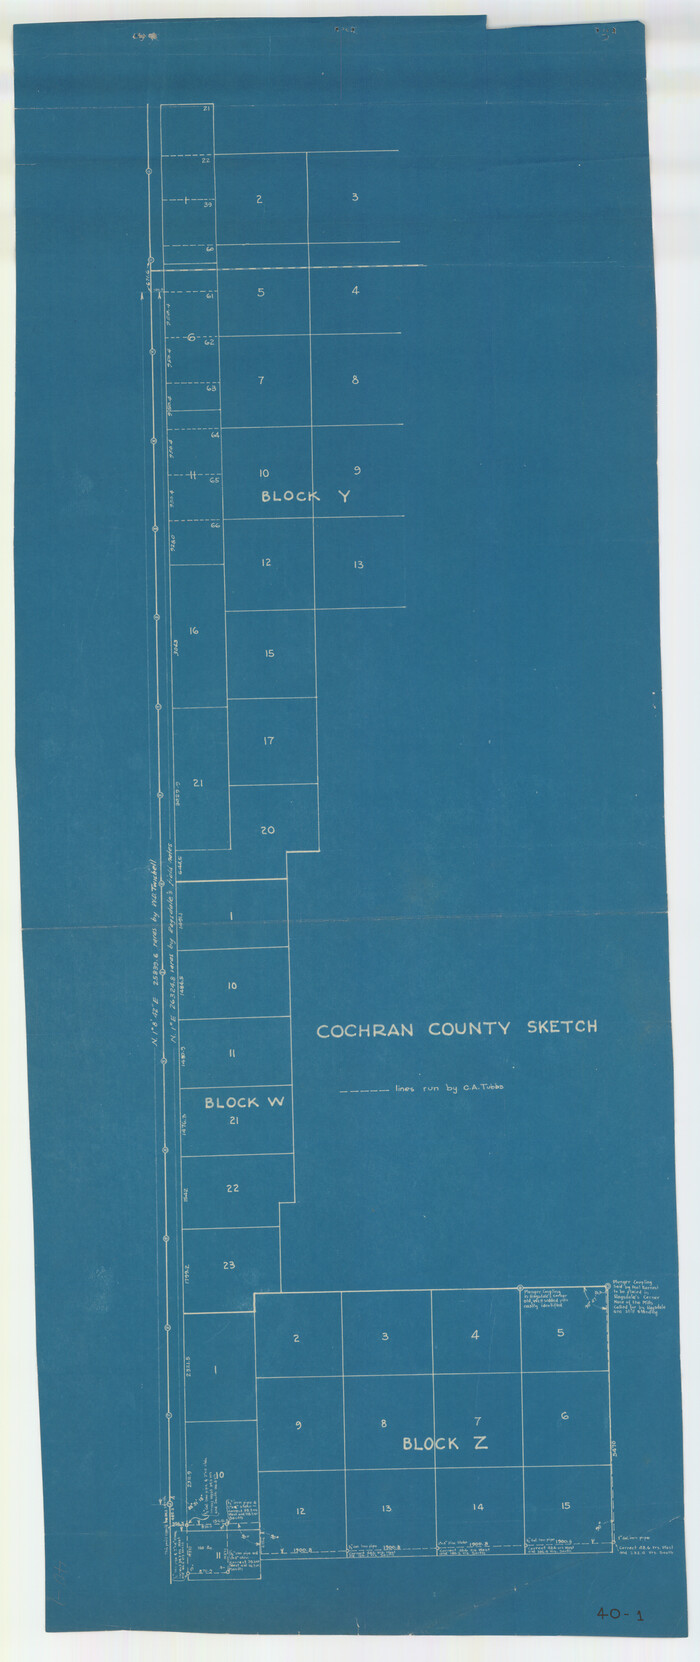 90435, Cochran County Sketch [showing lines run by C. A. Tubbs], Twichell Survey Records